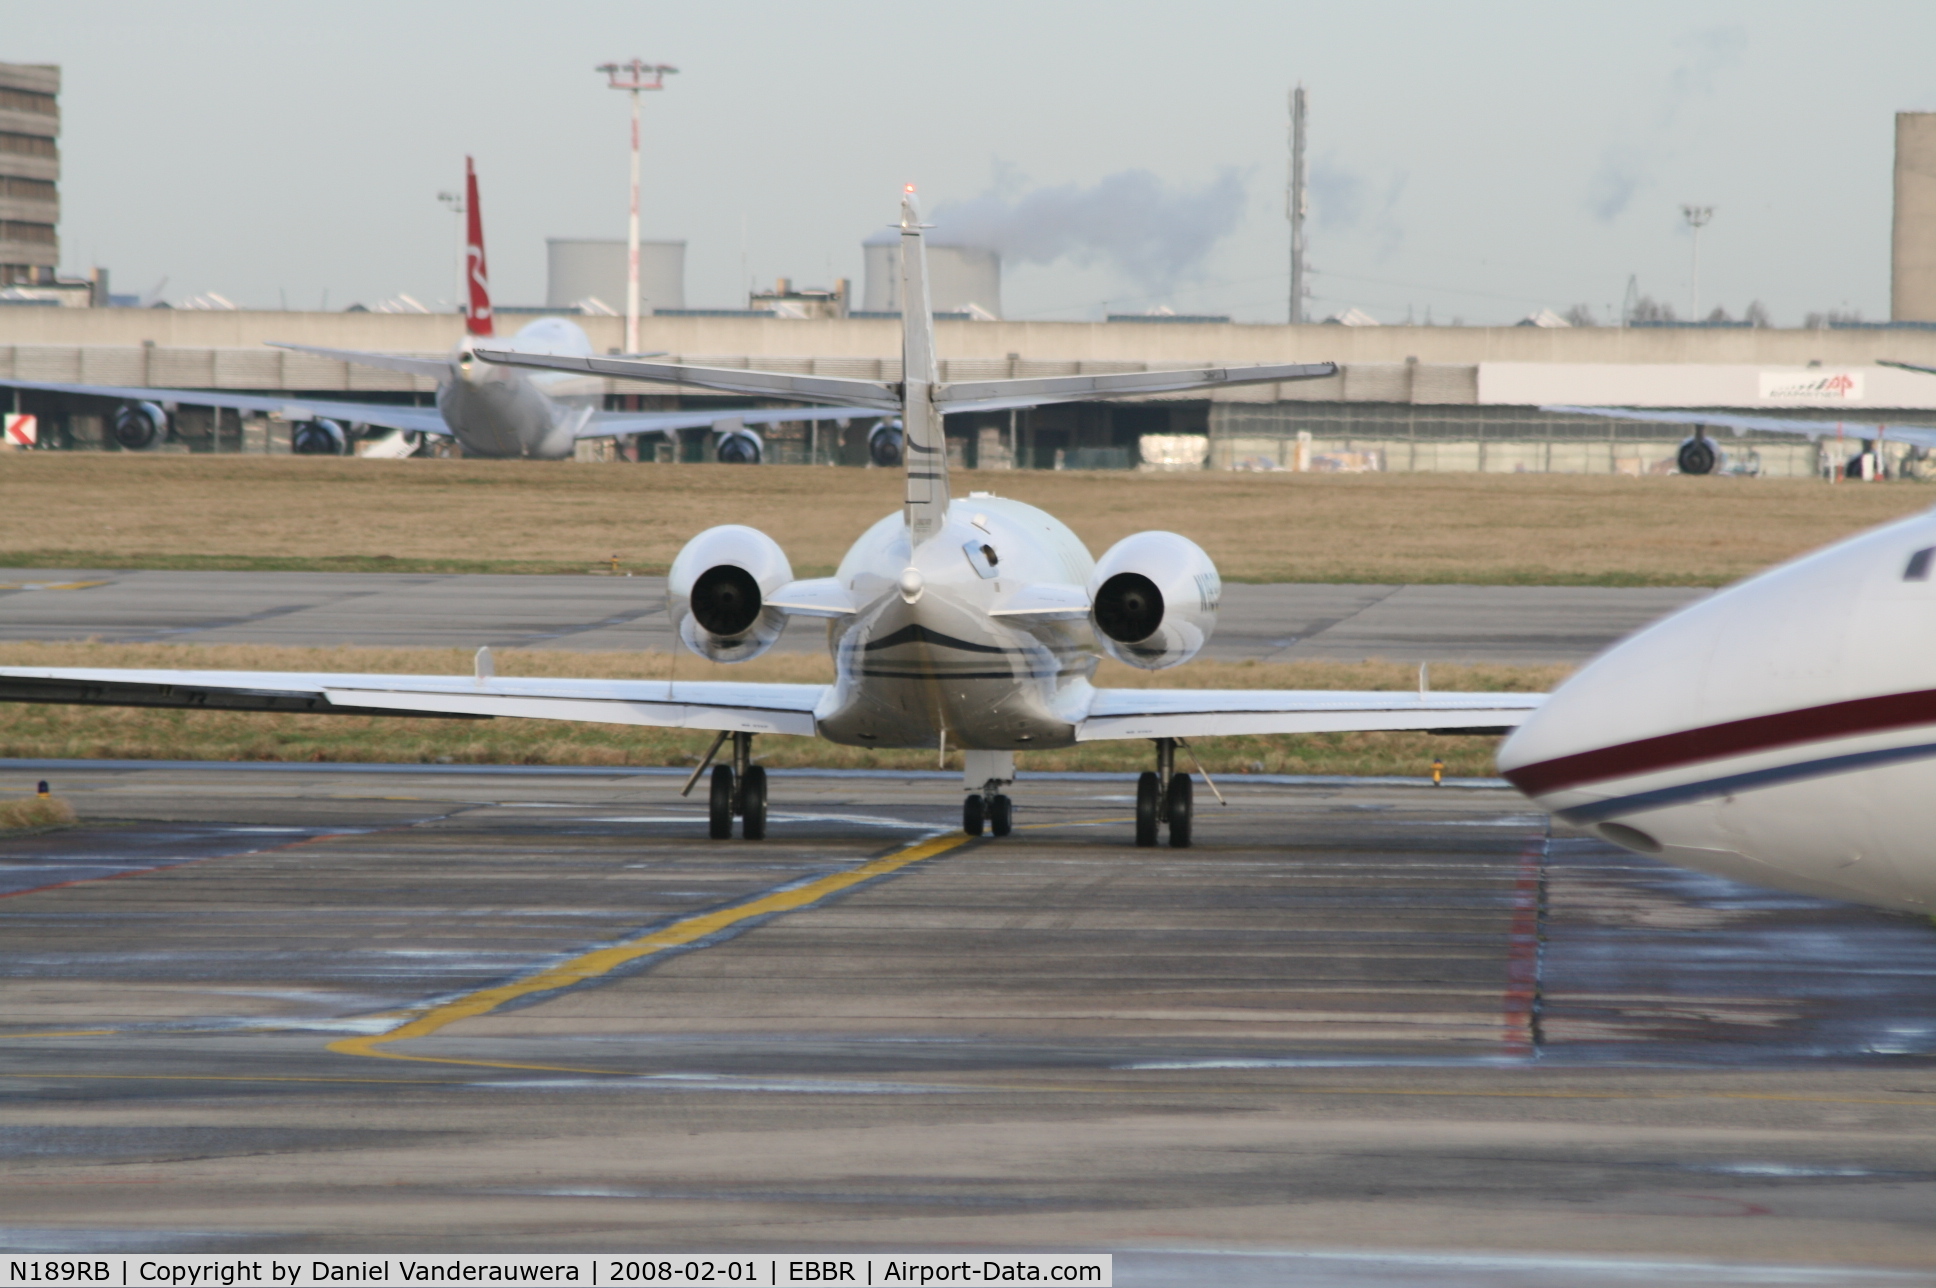 N189RB, 1972 Dassault Falcon (Mystere) 20F C/N 262, manoeuvring to leave G.A. apron